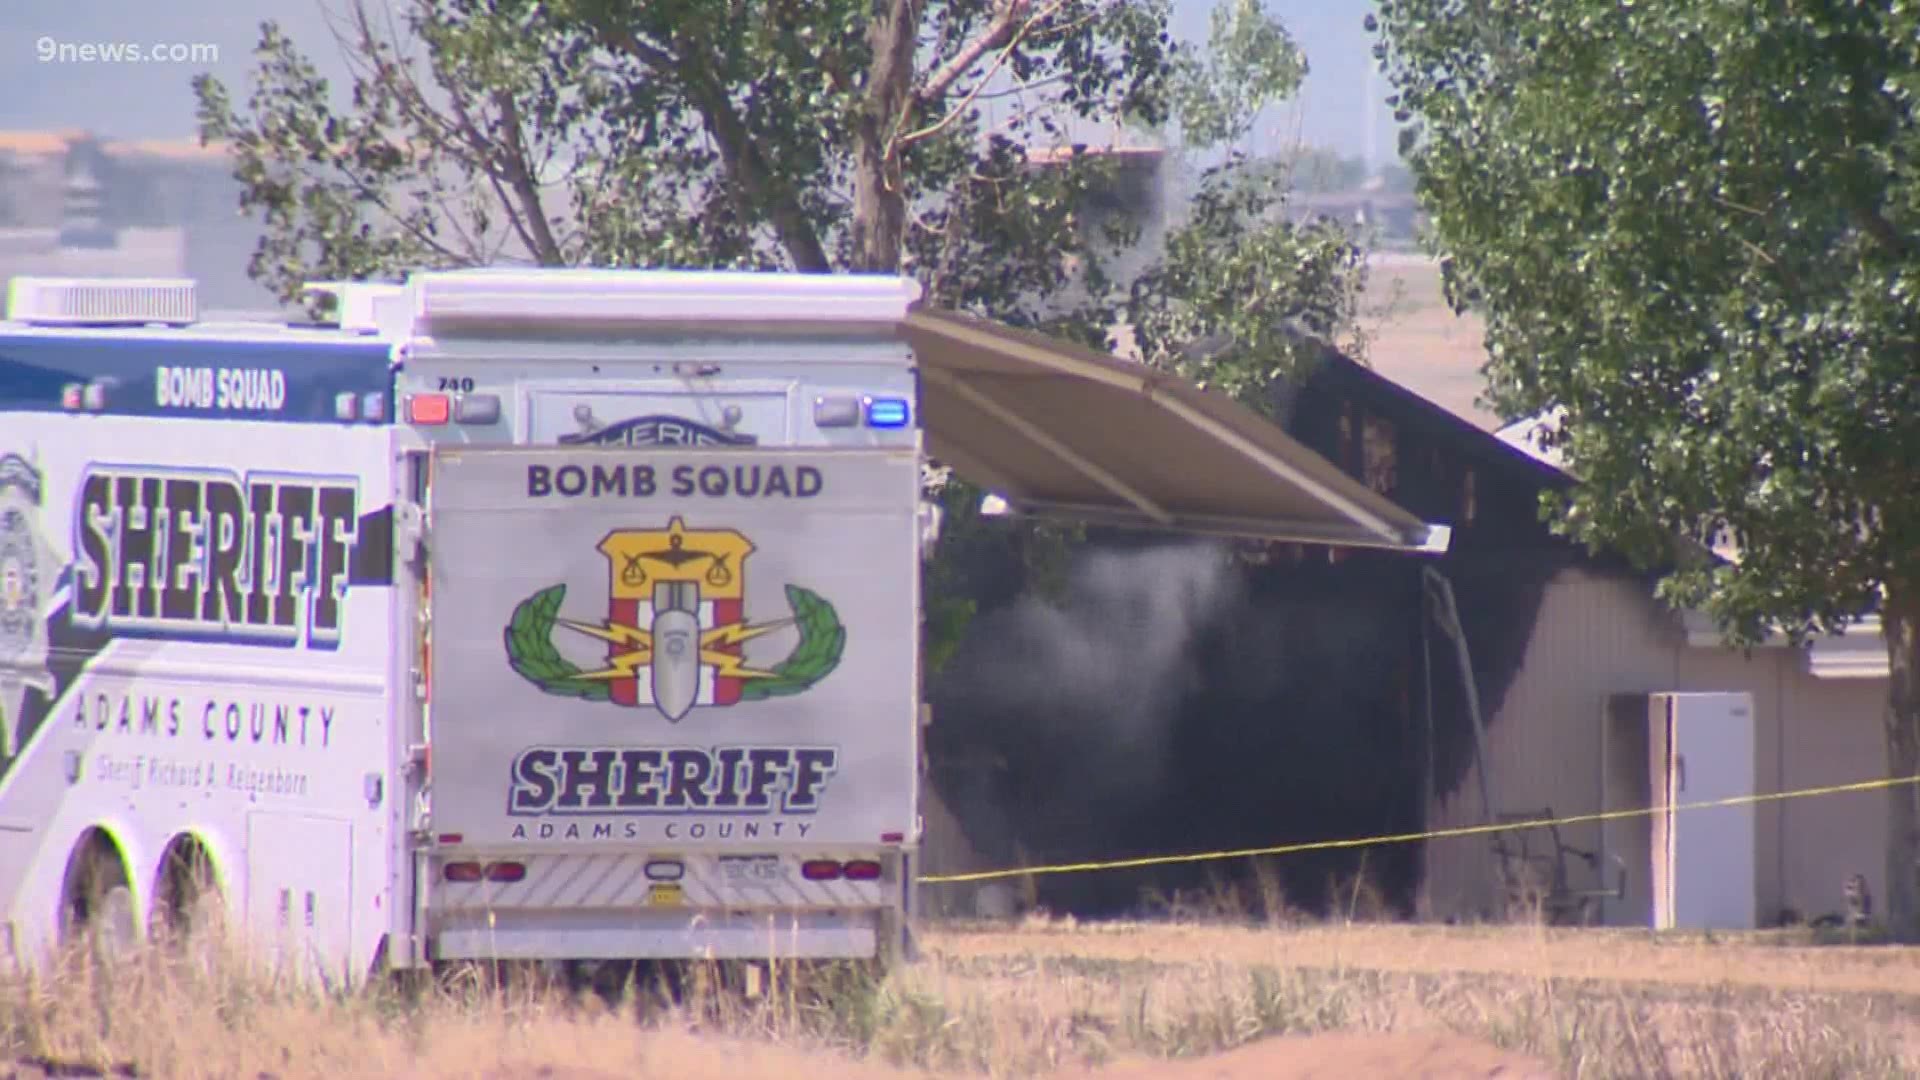 A man led deputies on a chase that went through multiple jurisdictions after setting fire to a home near East 156th Avenue and Colorado Boulevard in Adams County.